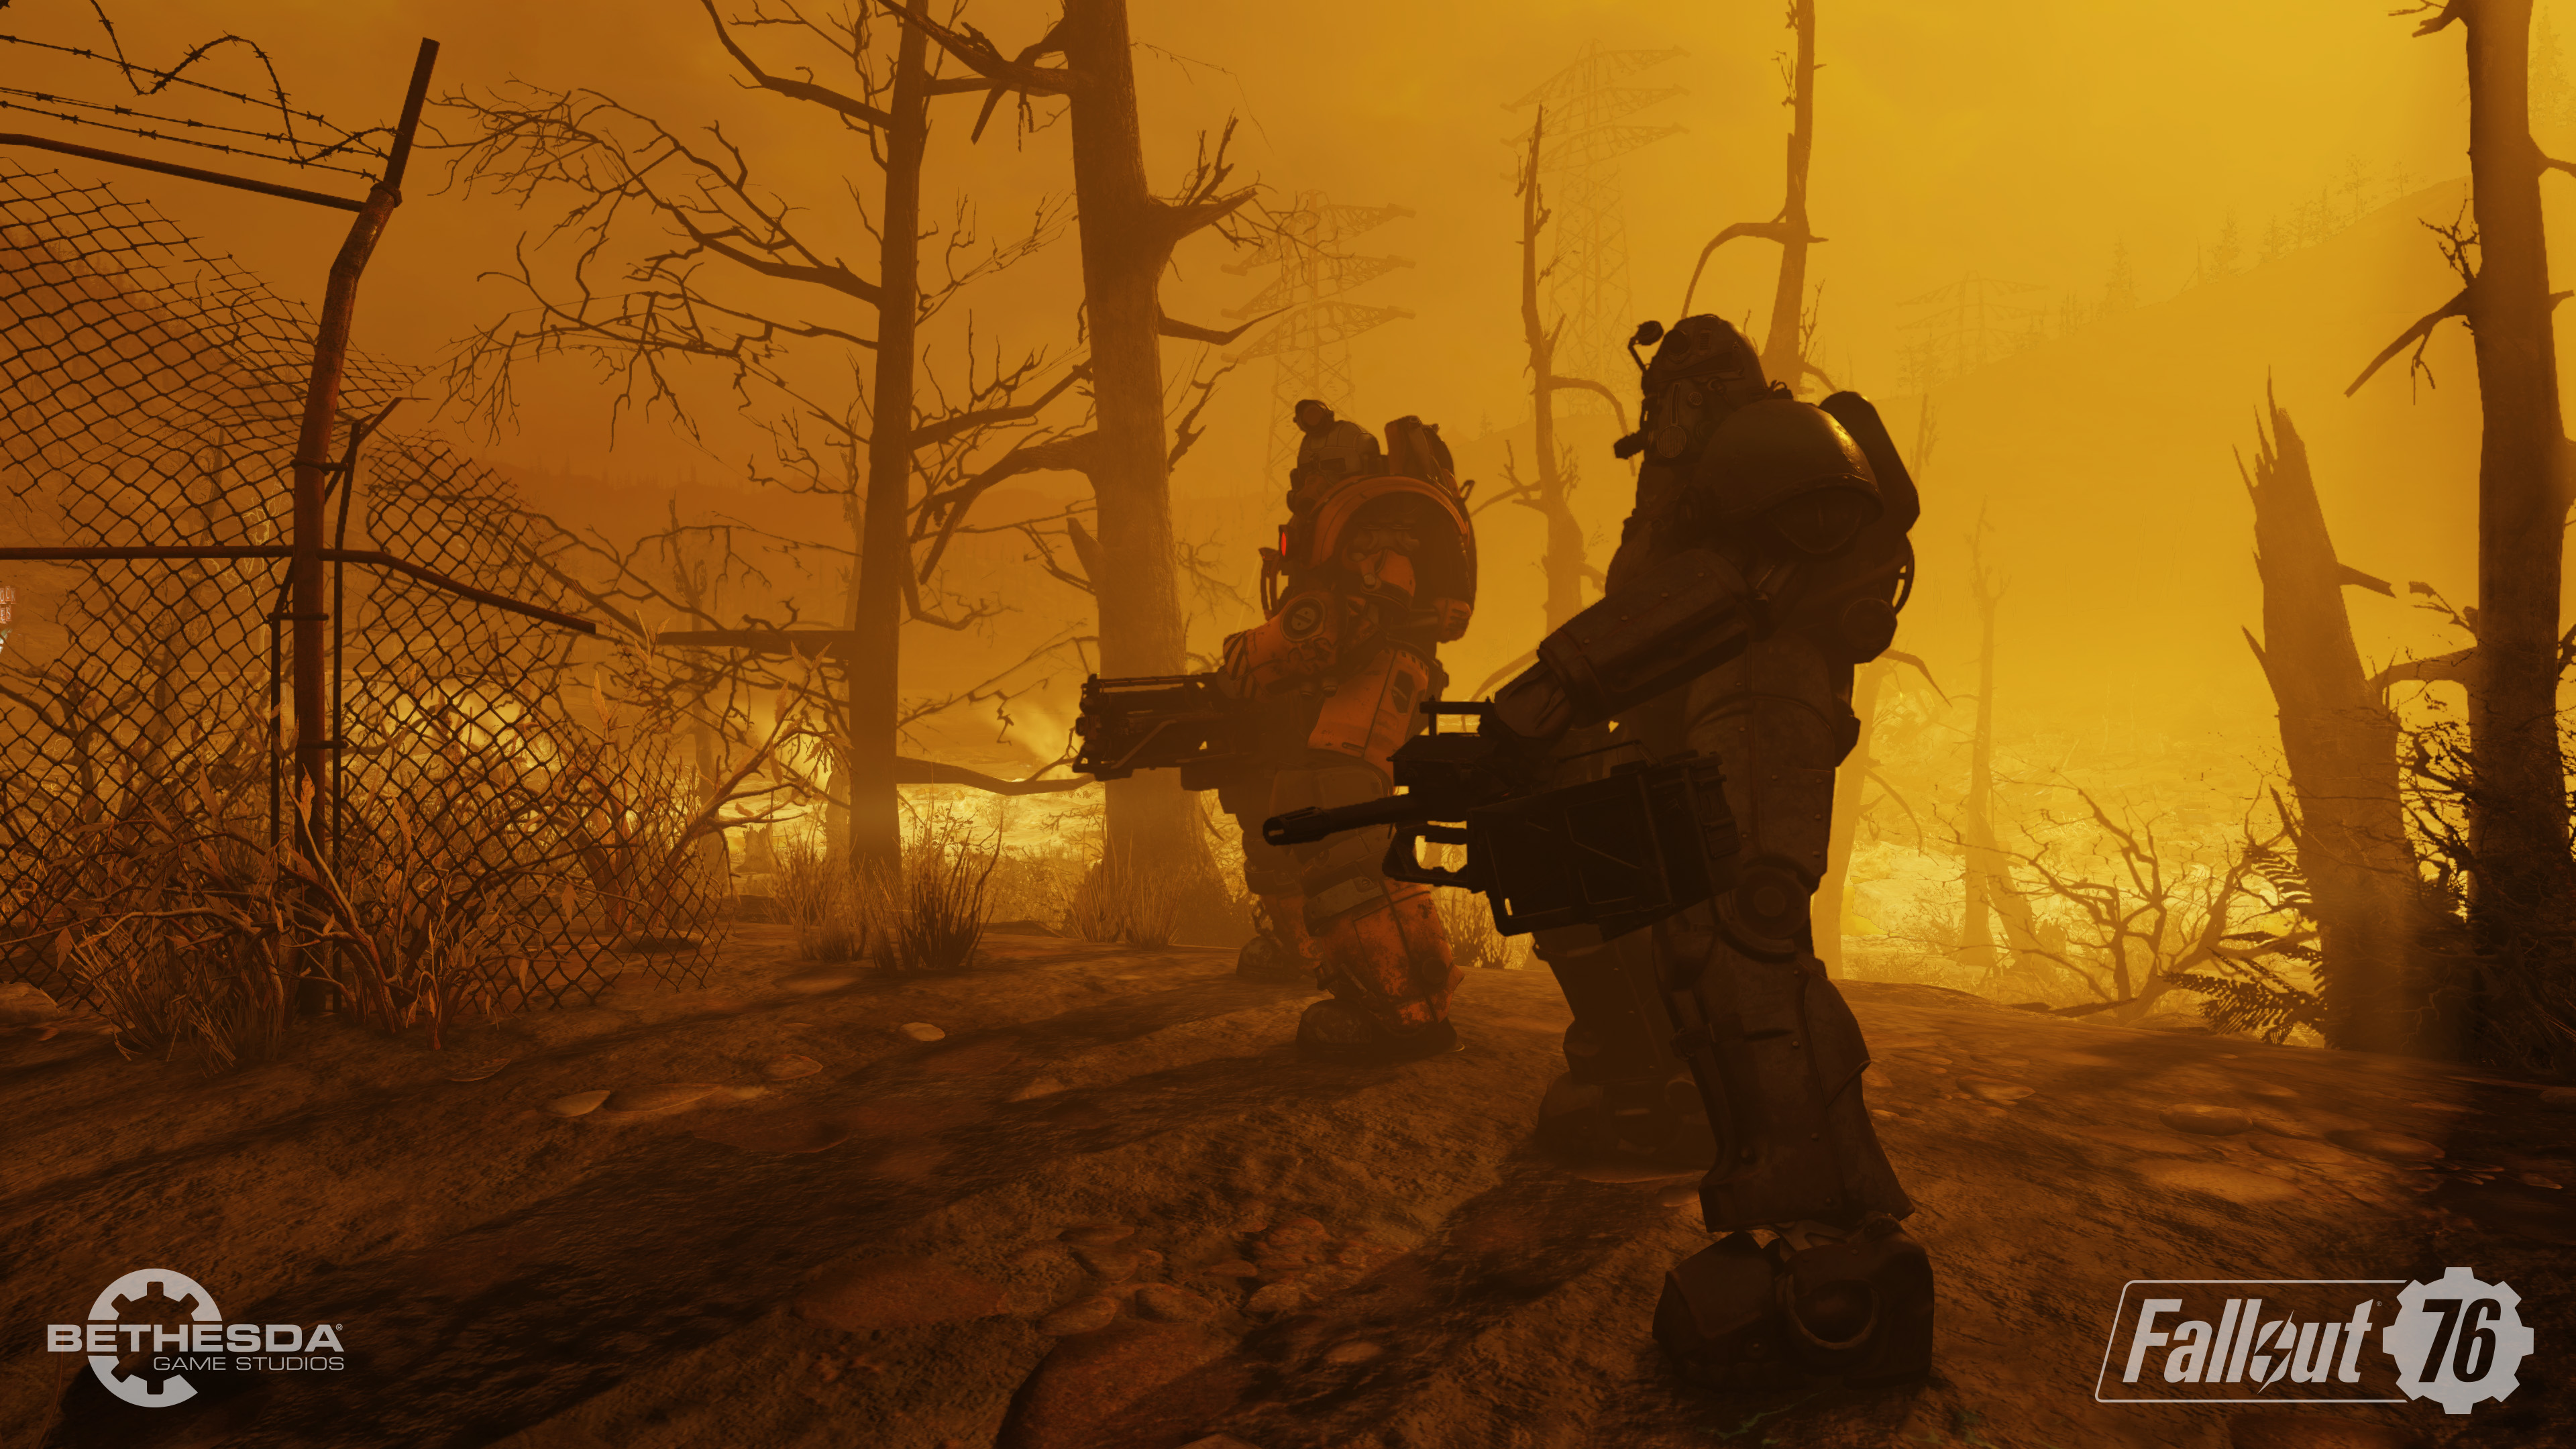 Fallout 76 beta - post-nuclear landscape with two soldiers